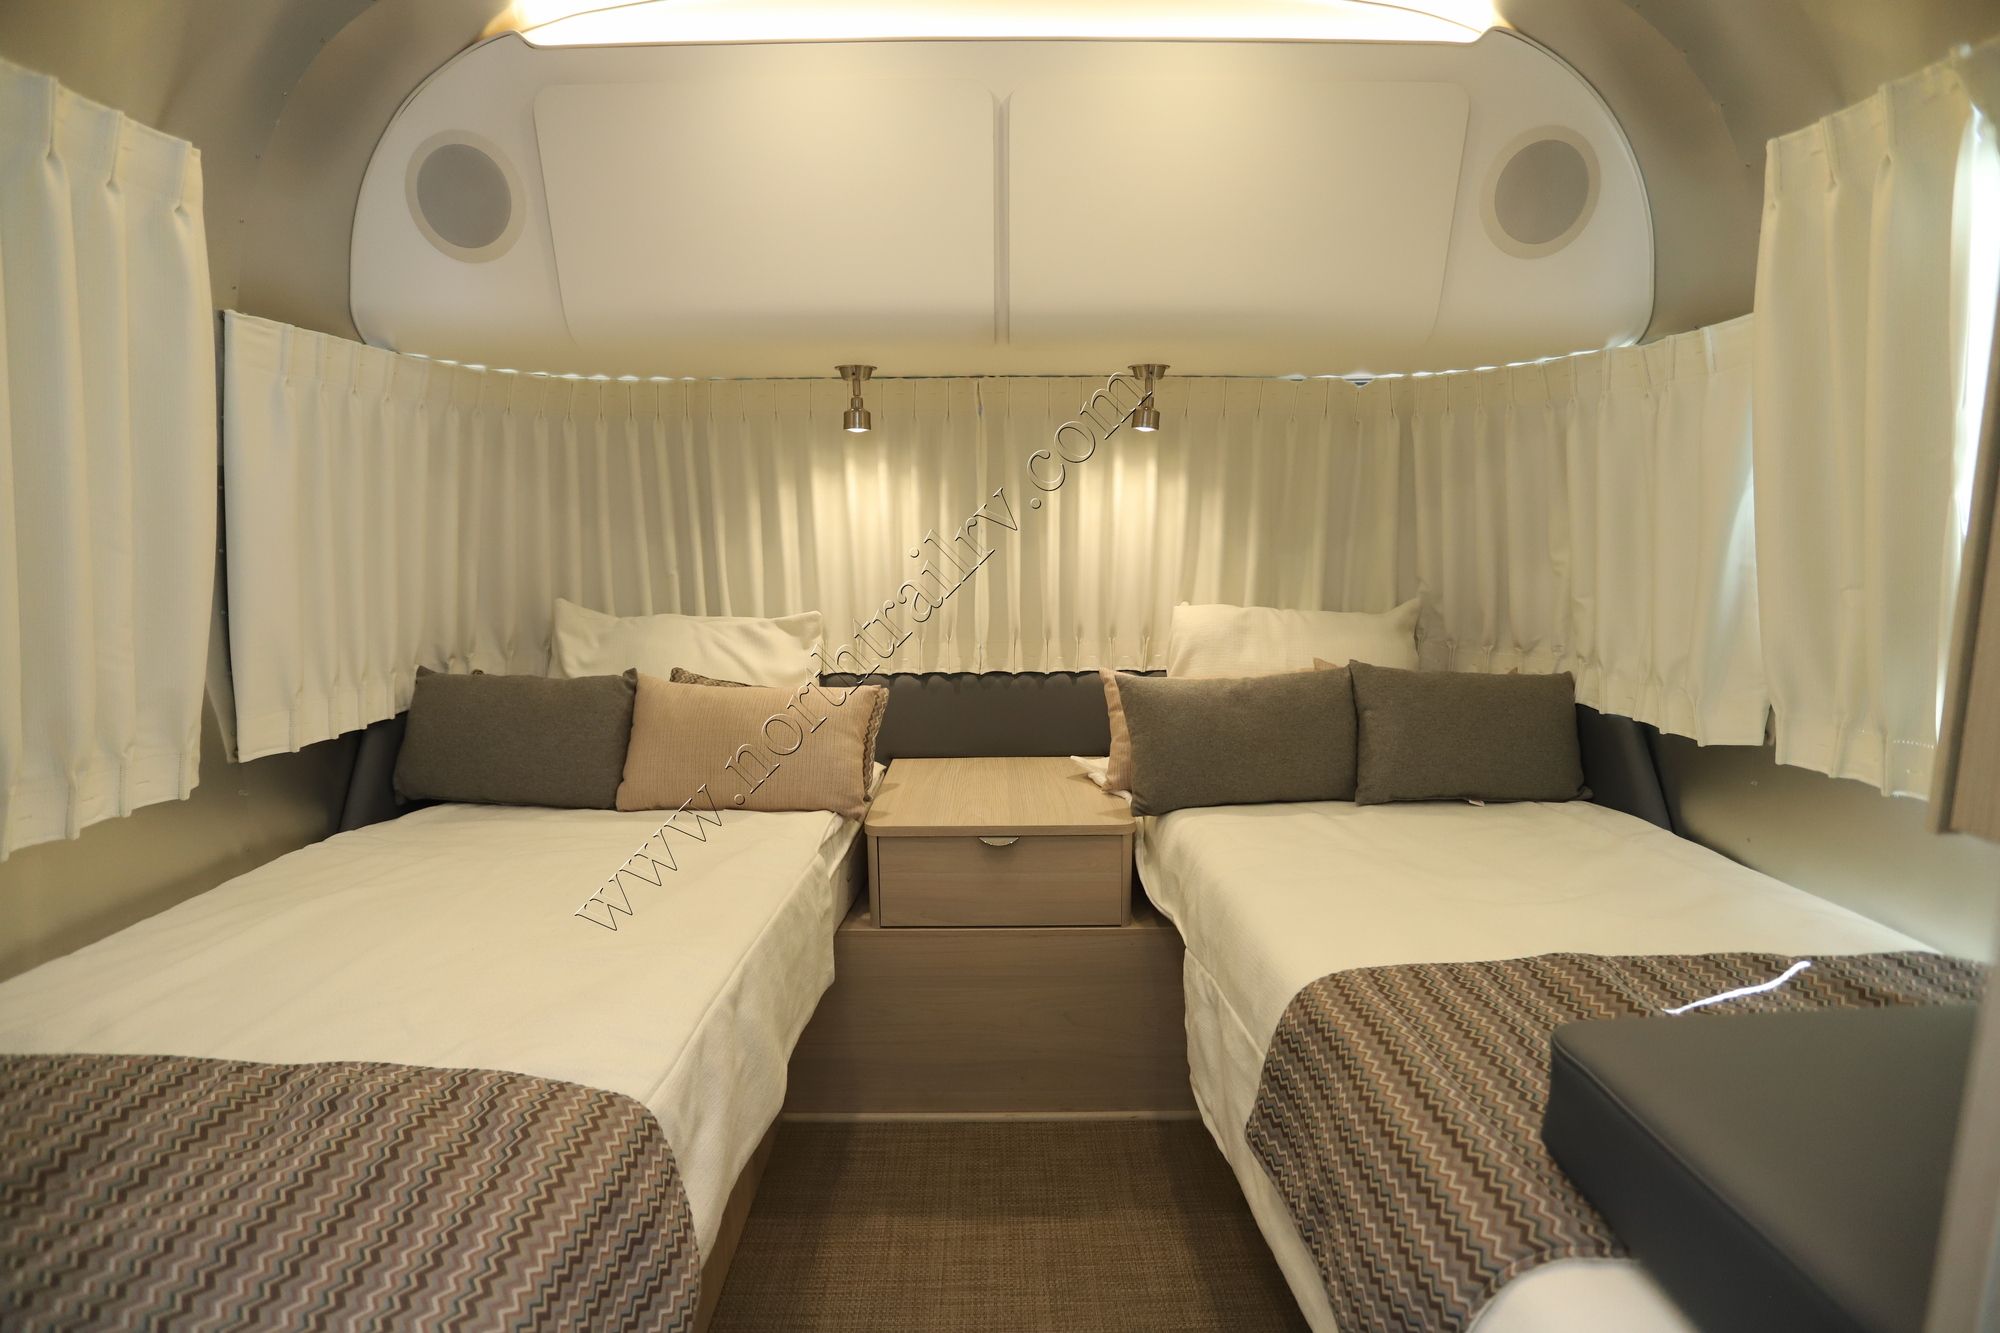 Used 2021 Airstream Globetrotter 25FB Travel Trailer  For Sale